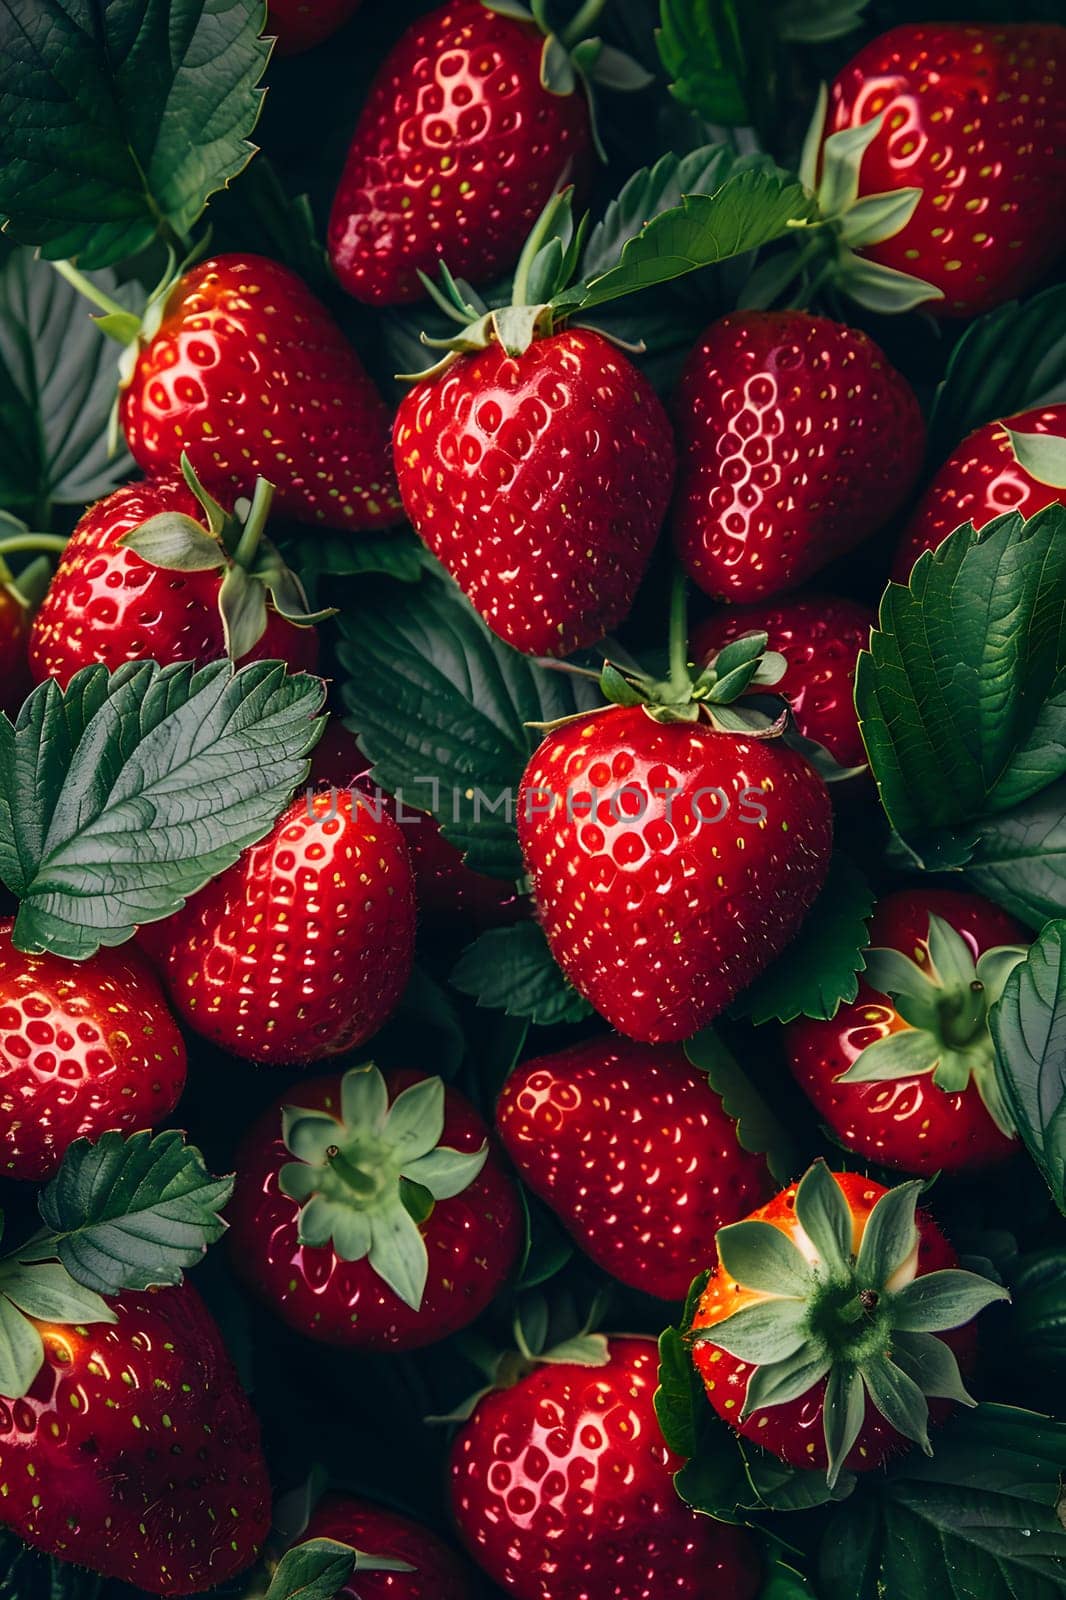 Delicious strawberries, a staple food, are a seedless fruit that is naturally grown on plants. These superfoods are popular ingredients in many natural foods